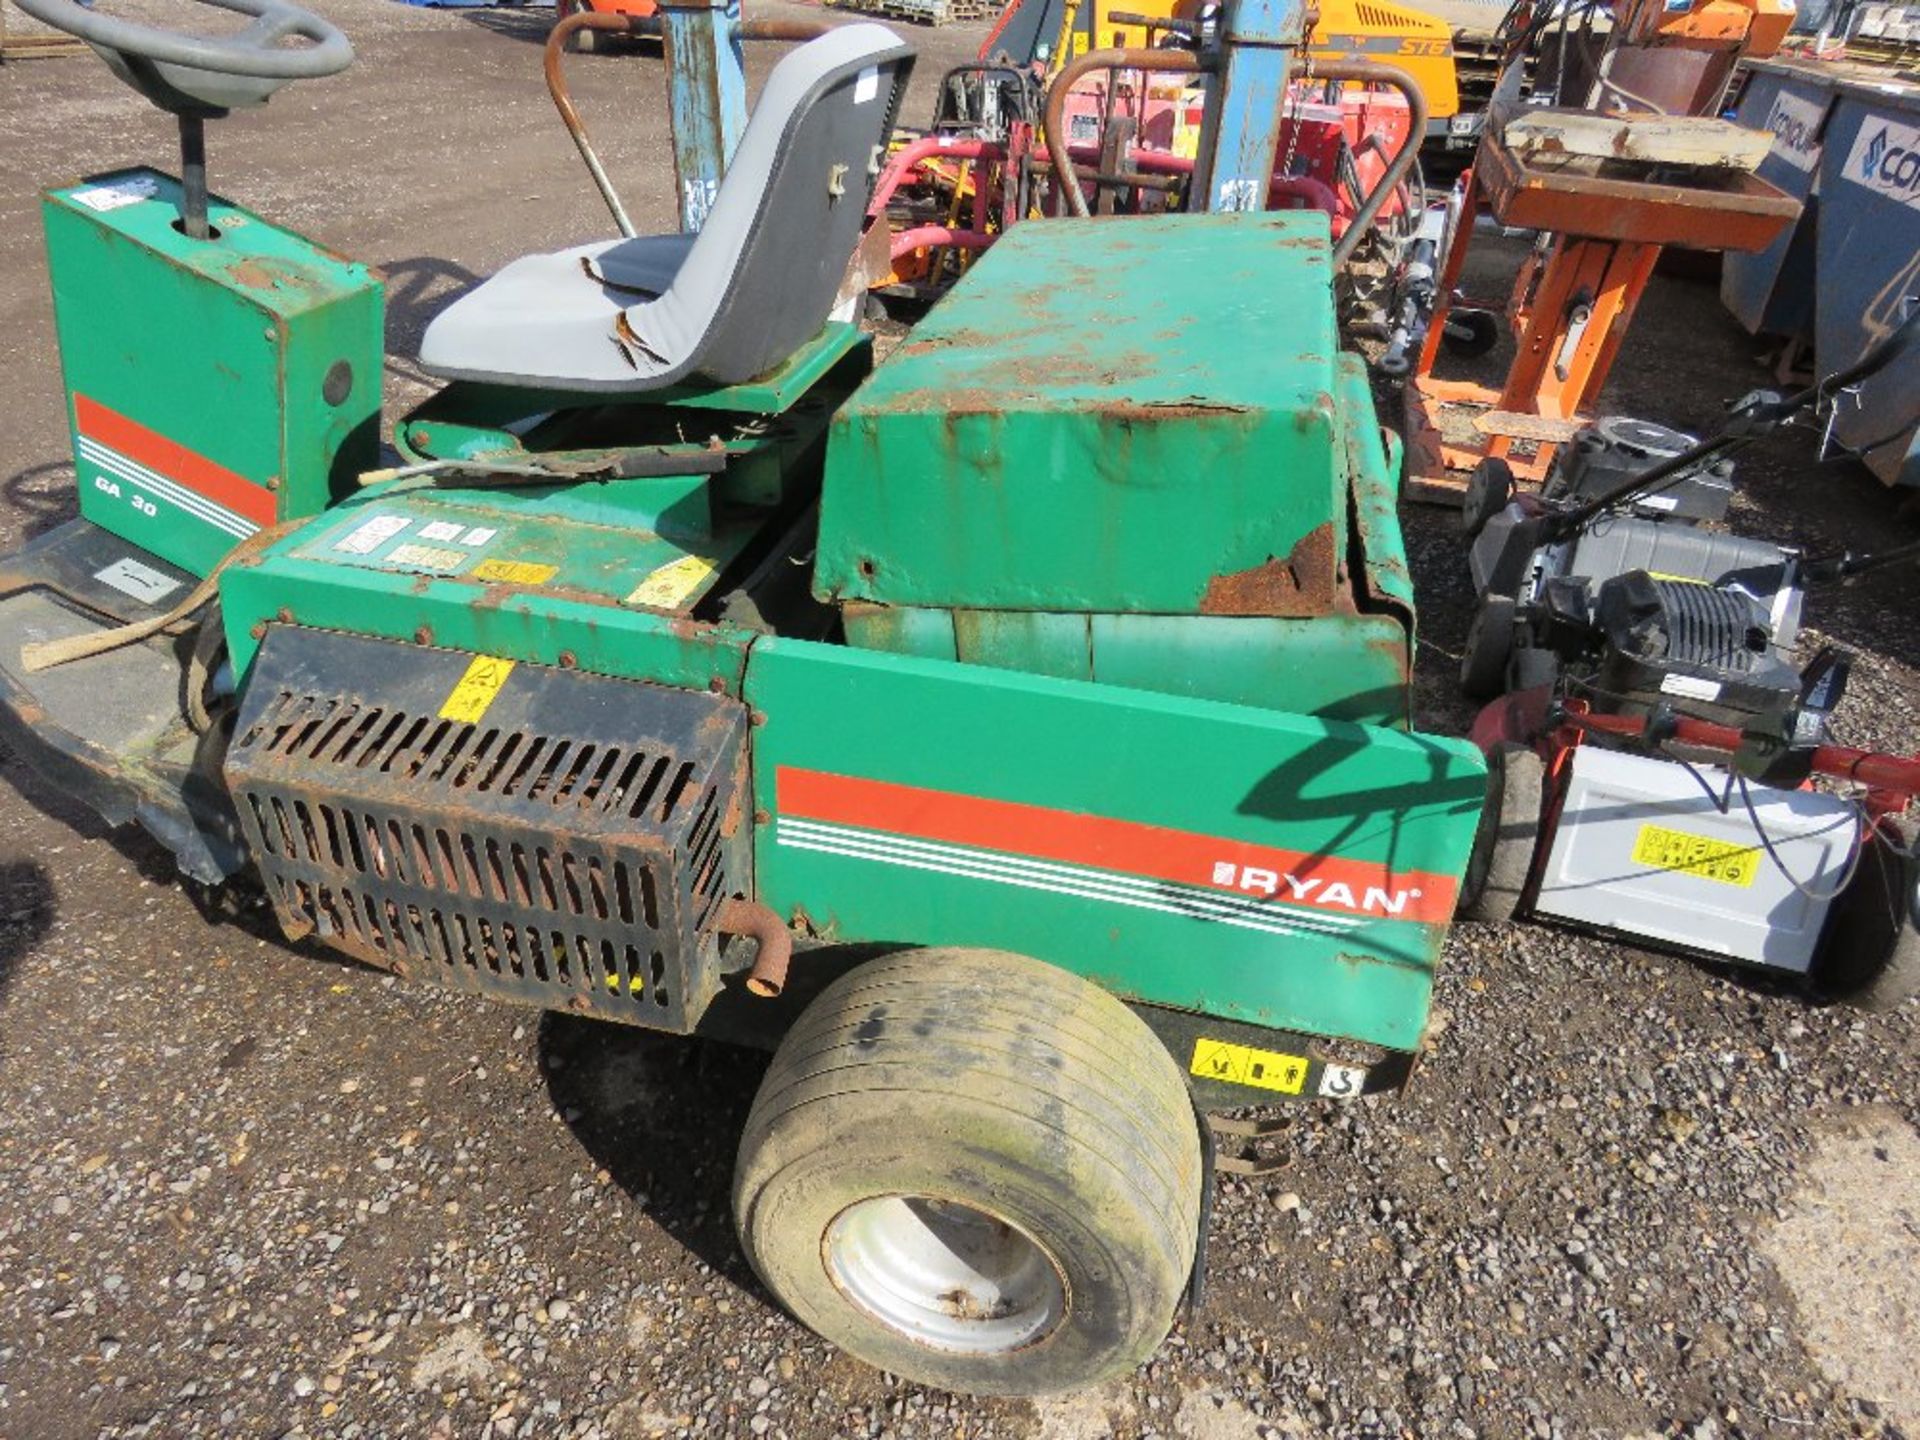 RYAN GA30 PETROL ENGINED SPIKER UNIT. UNTESTED. DIRECT FROM FOOTBALL CLUB. - Image 3 of 5